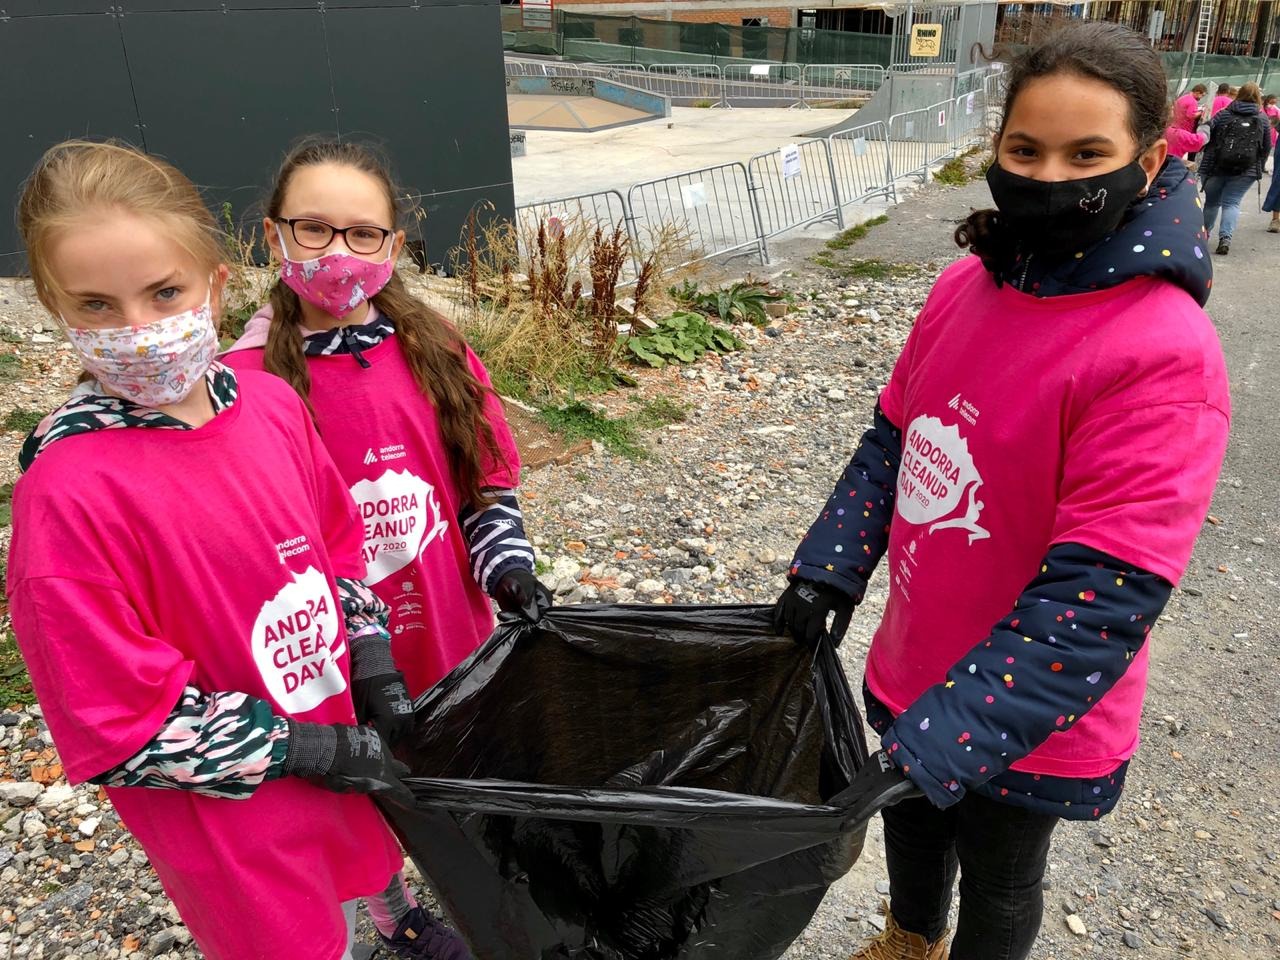 A total of 837 schoolchildren participate by picking up litter as part of the European 'Clean Up Day' campaign